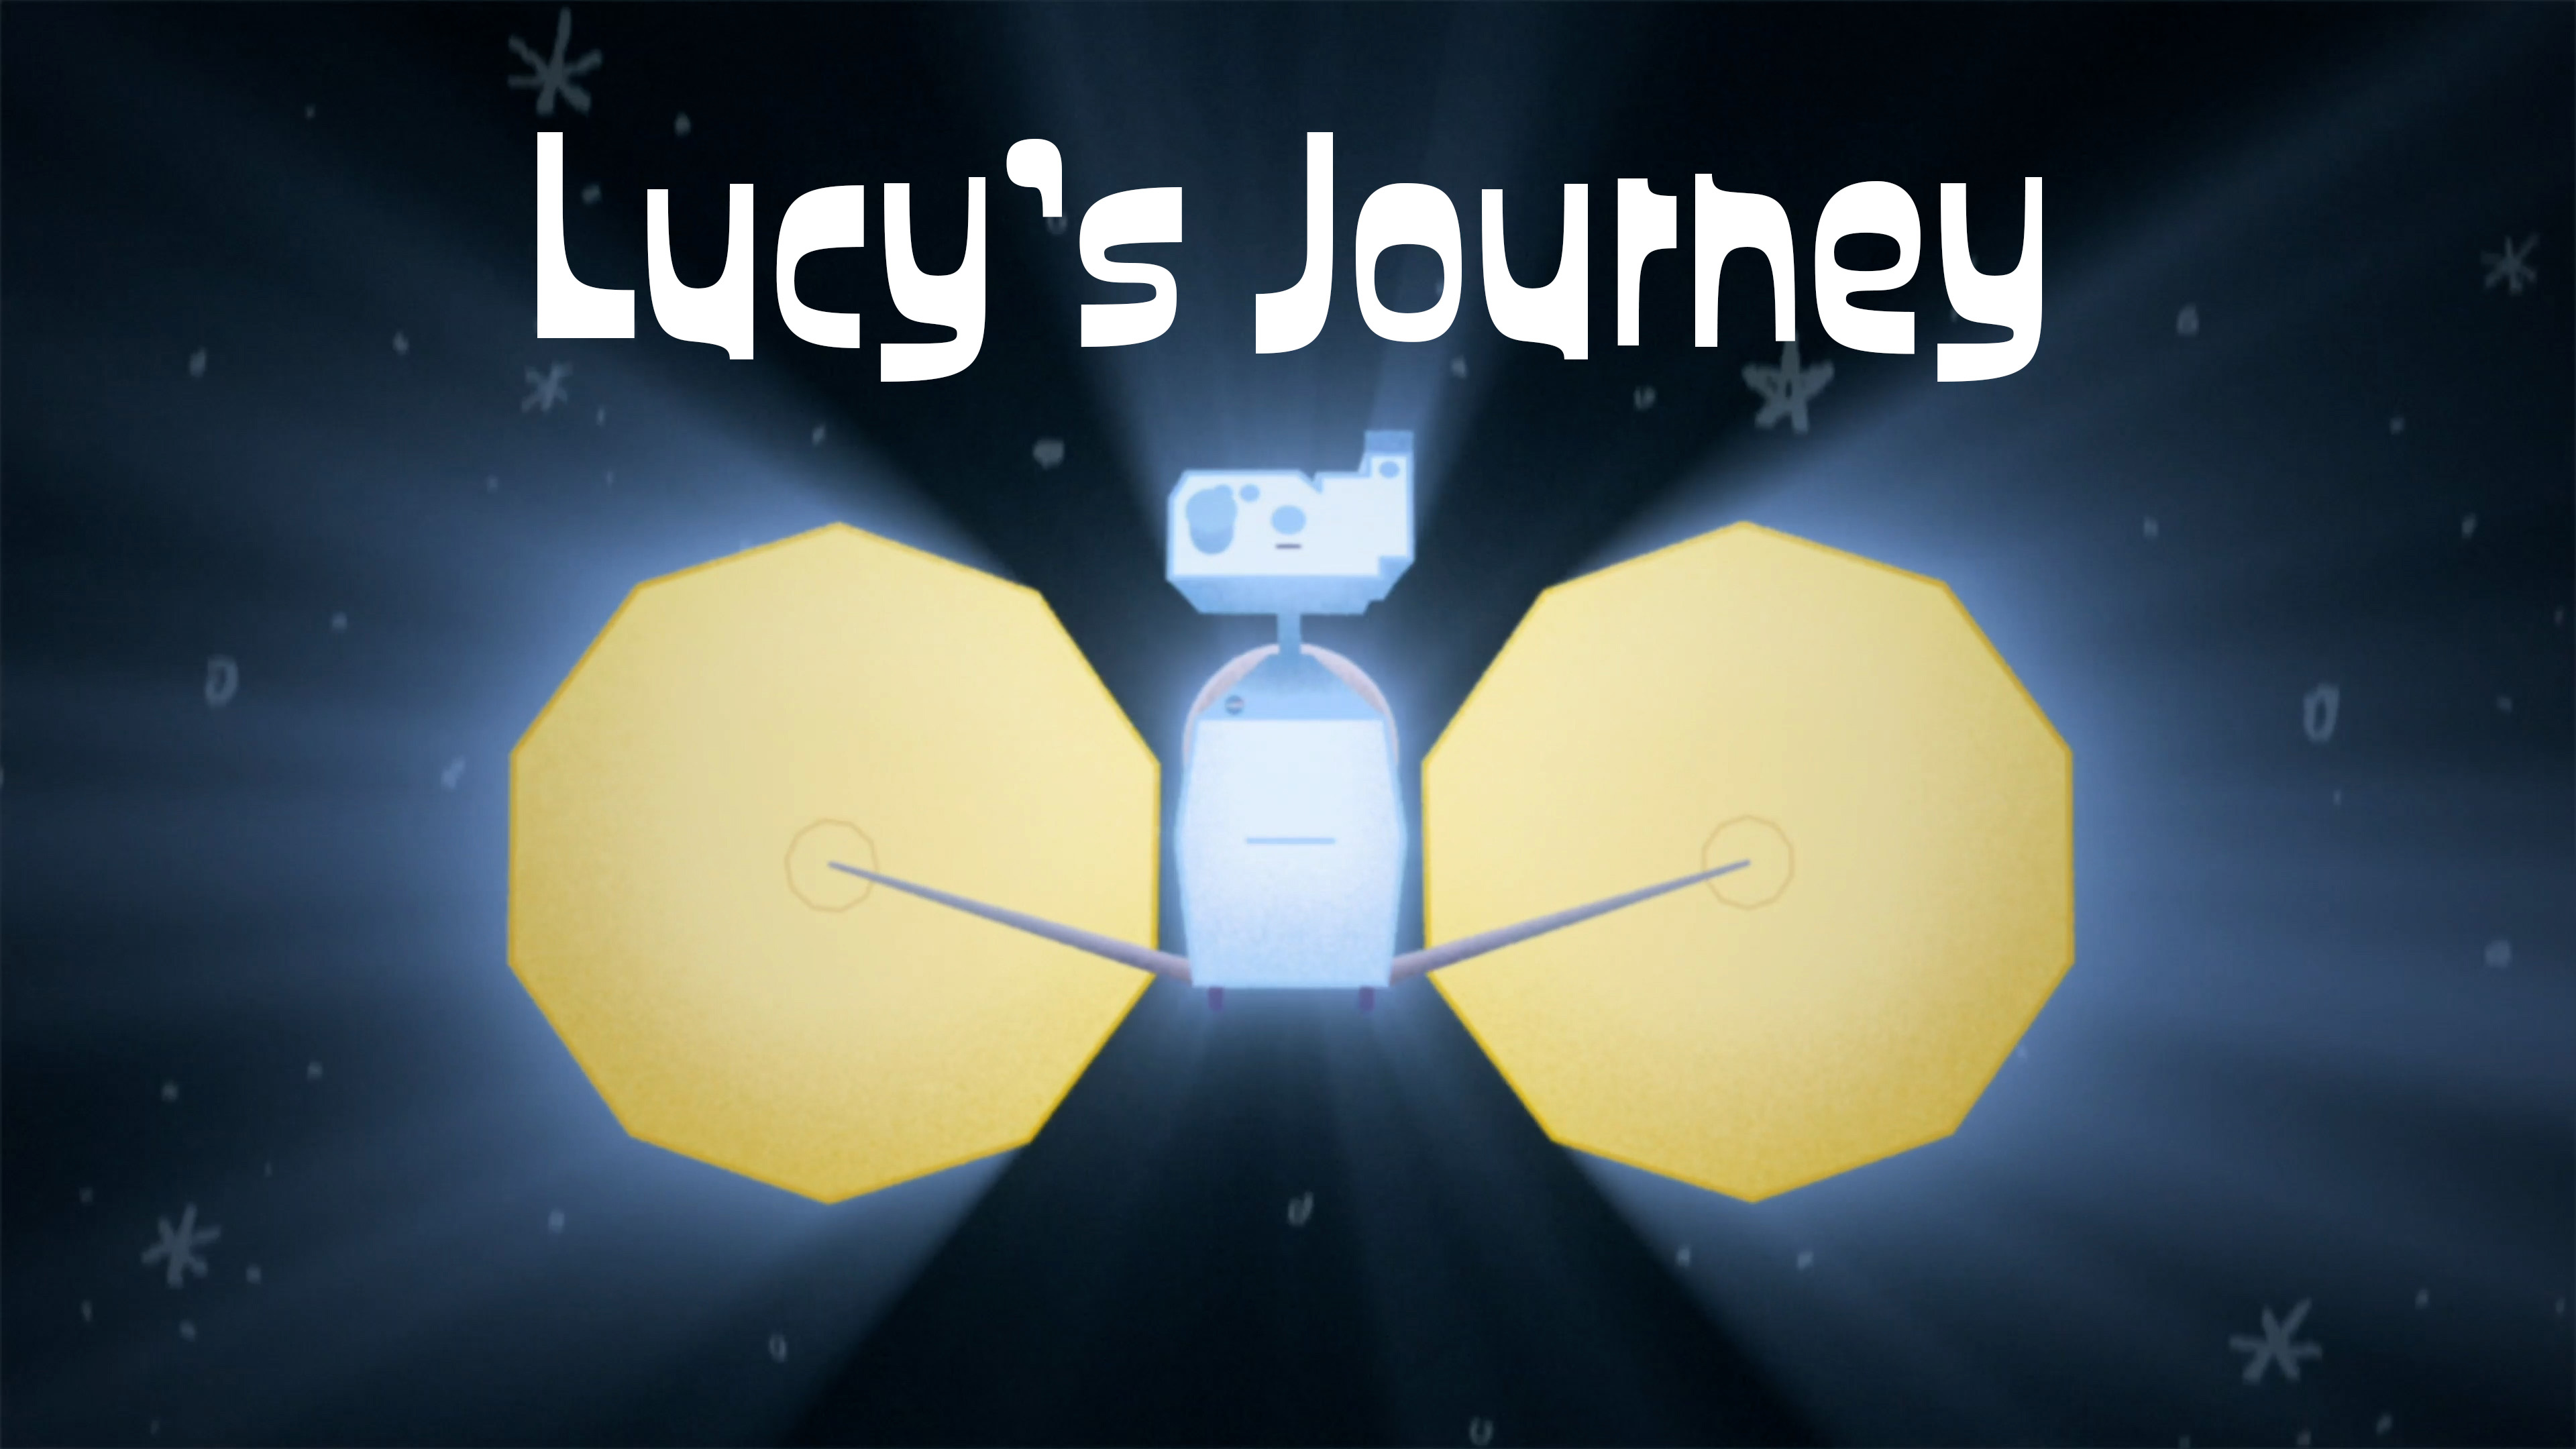 A cartoon spacecraft with two bright gold 10-sided panels is shown beneath the text "Lucy's Journey."